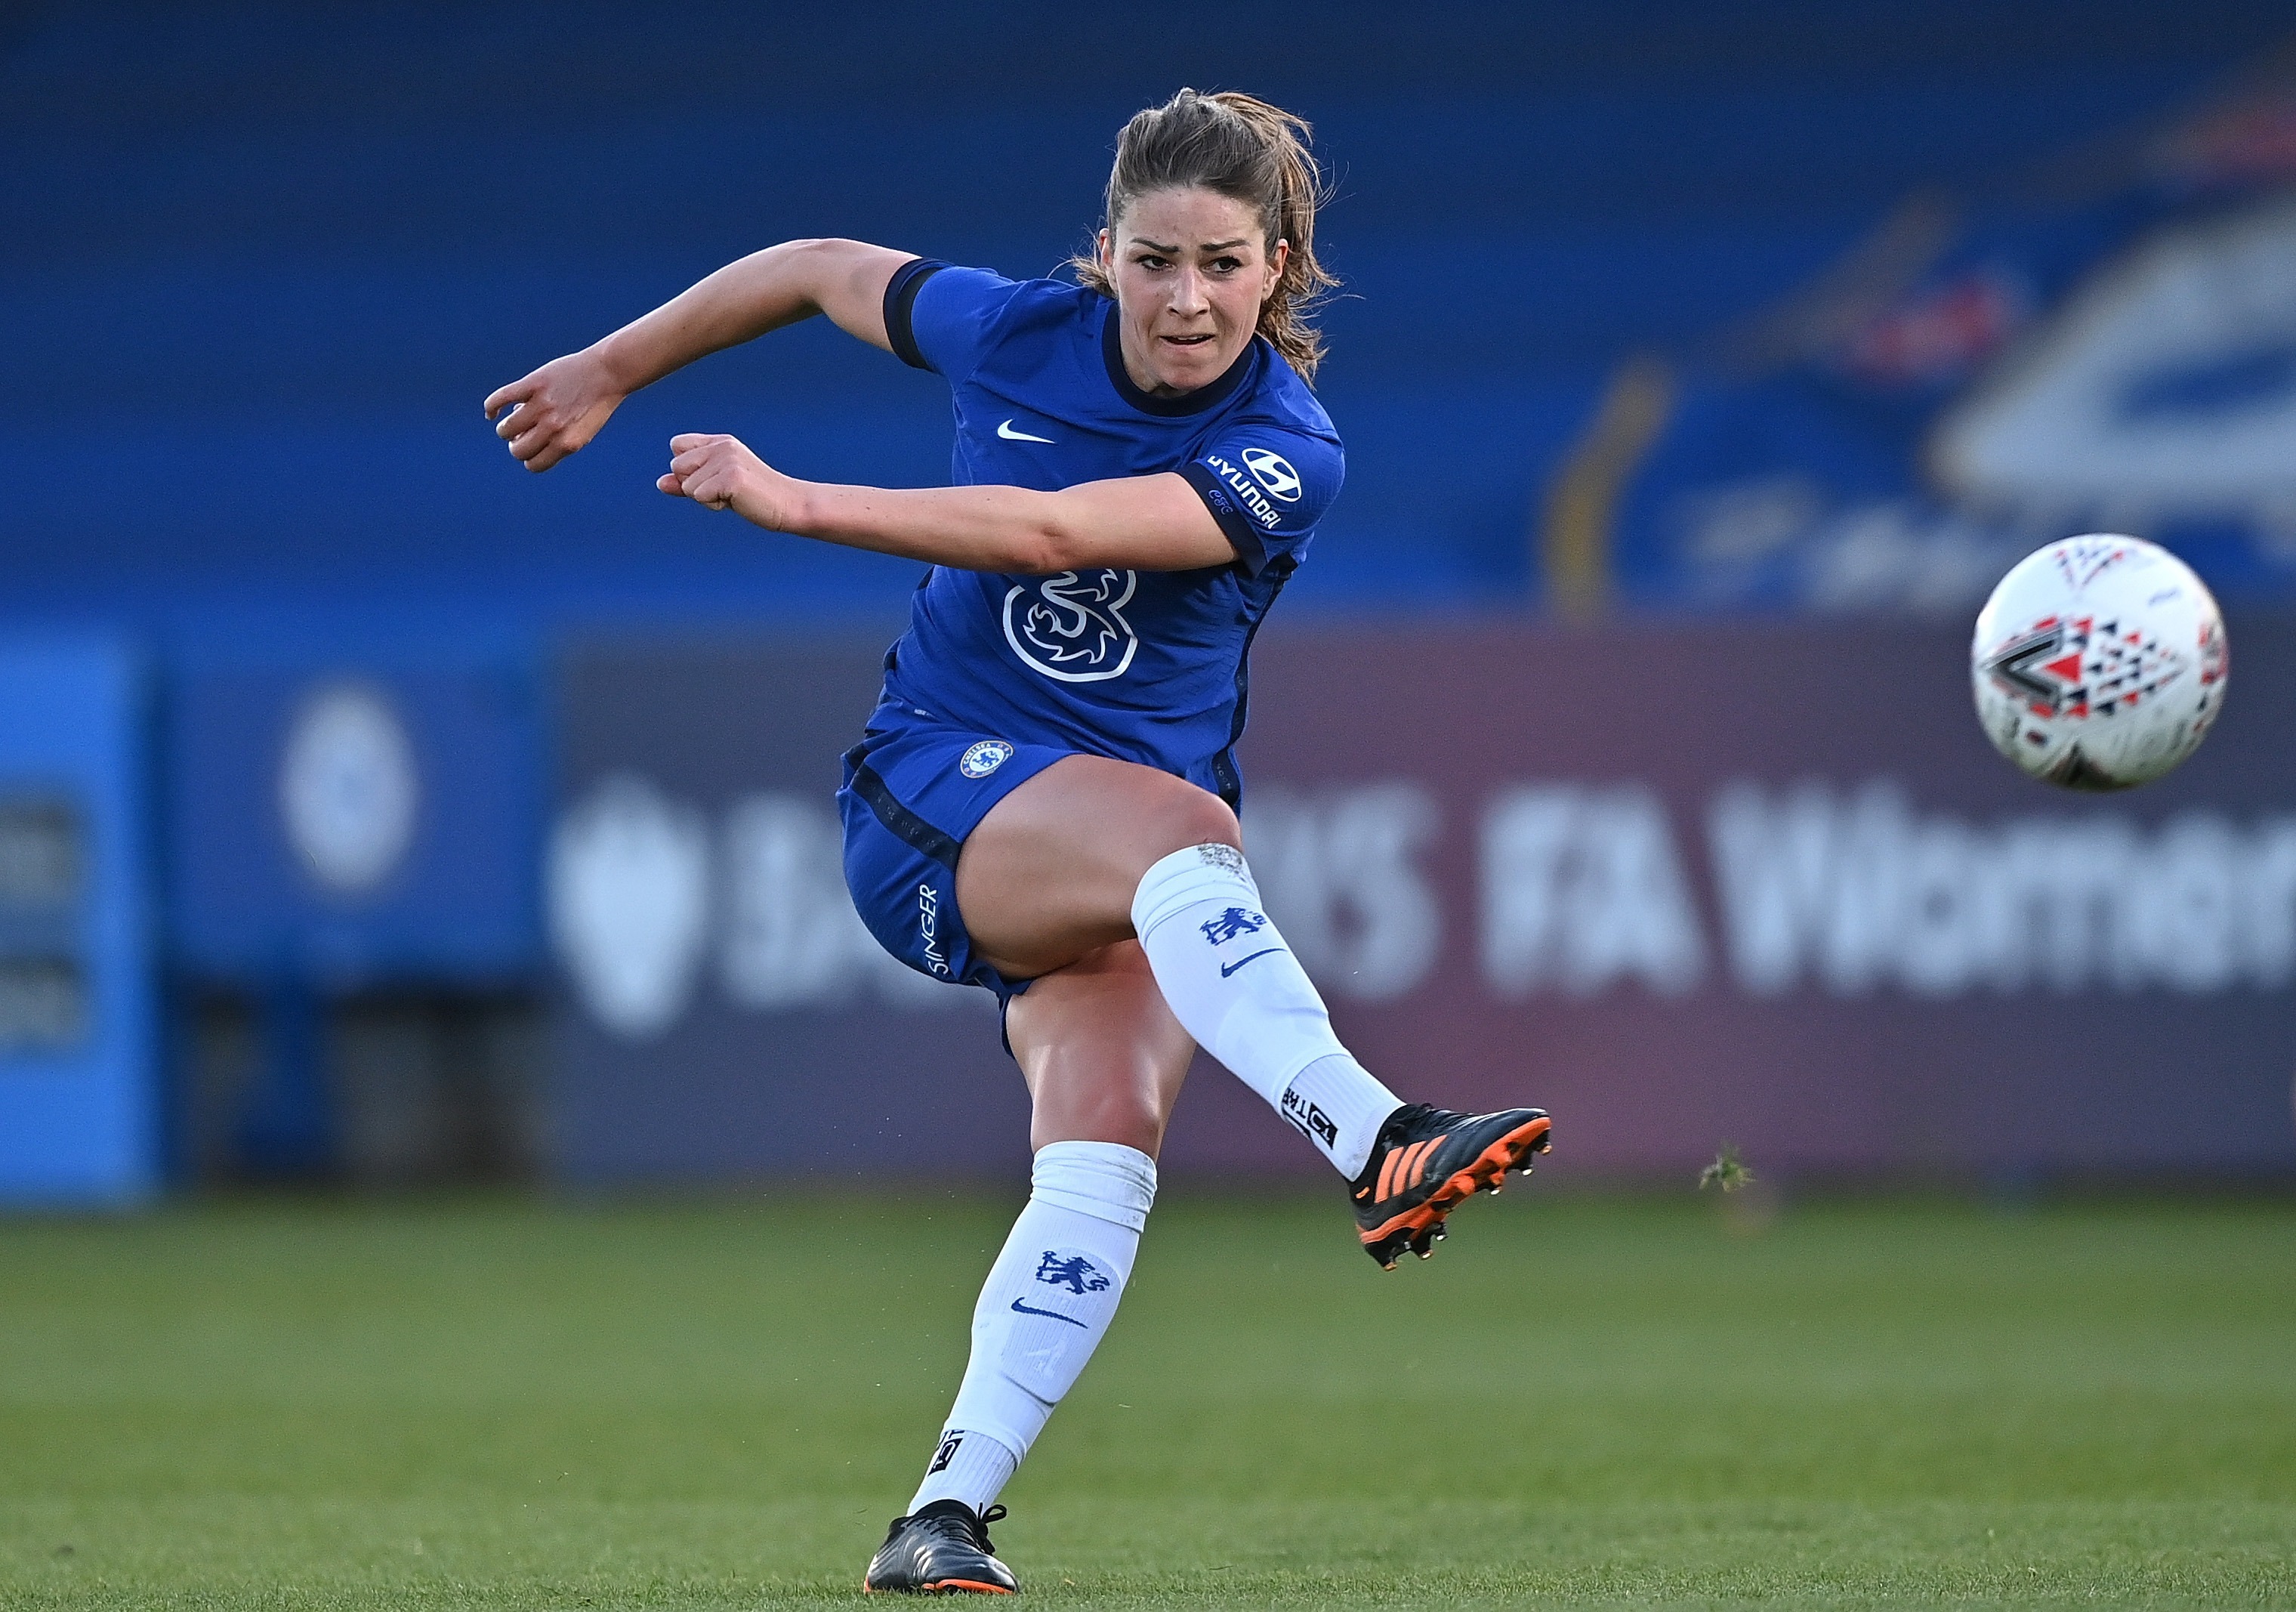 , Emma Hayes will have a link to Chelsea’s dugout and can watch training online as she recovers from a hysterectomy